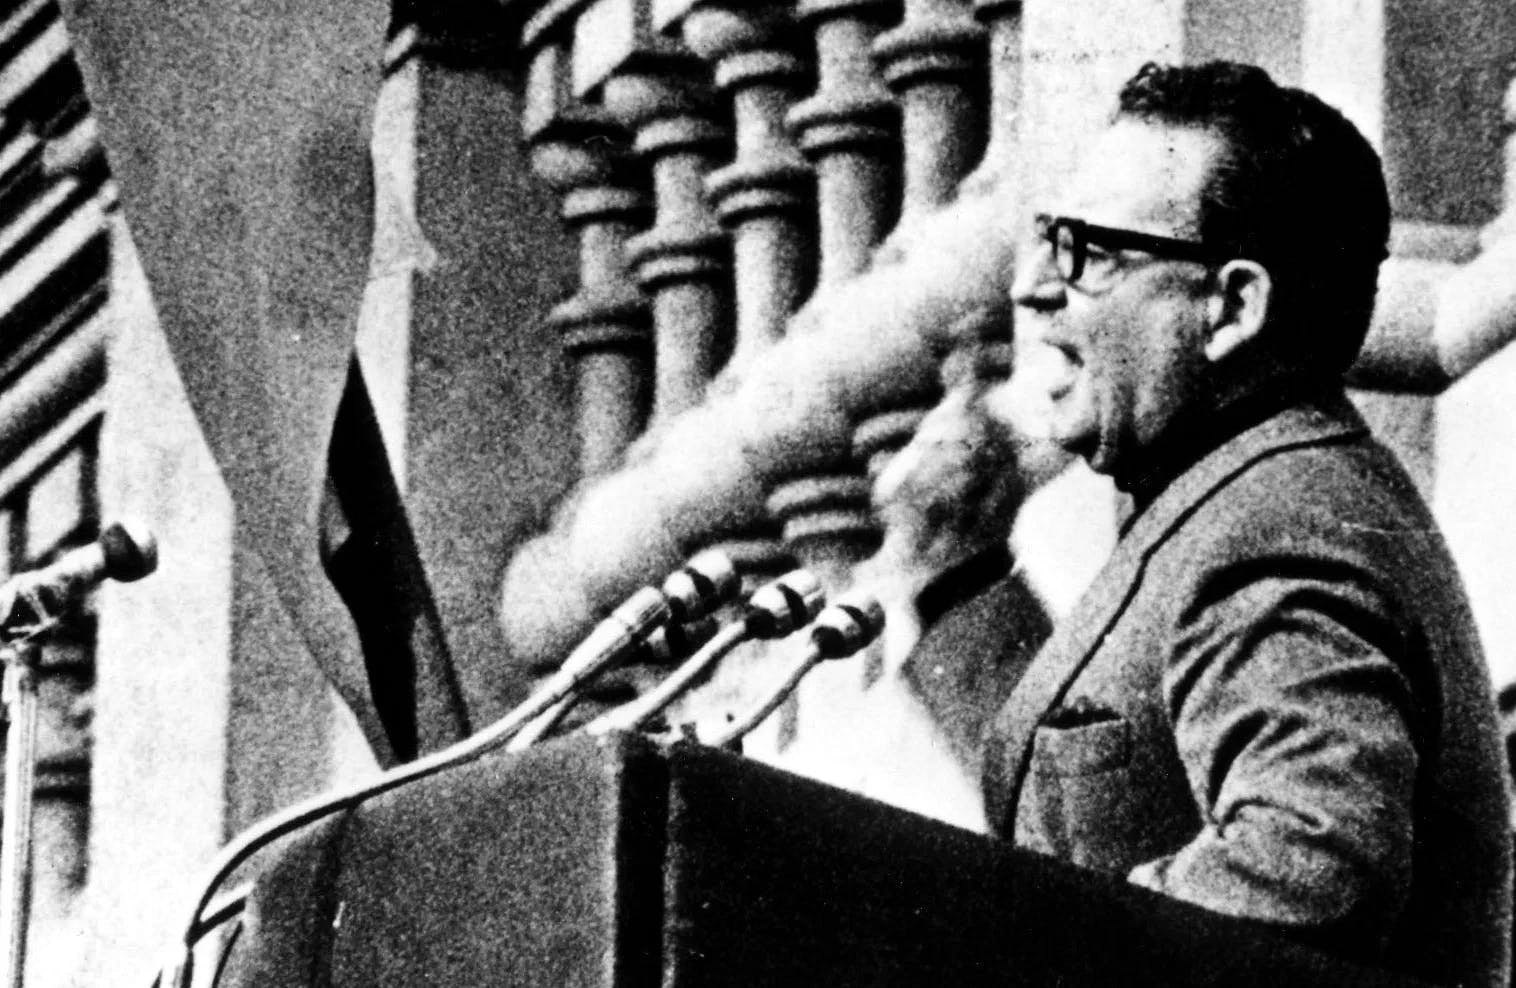 Salvador Allende gives a fiery speech before the coup in "The Battle of Chile" / Photo courtesy of Icarus Films.